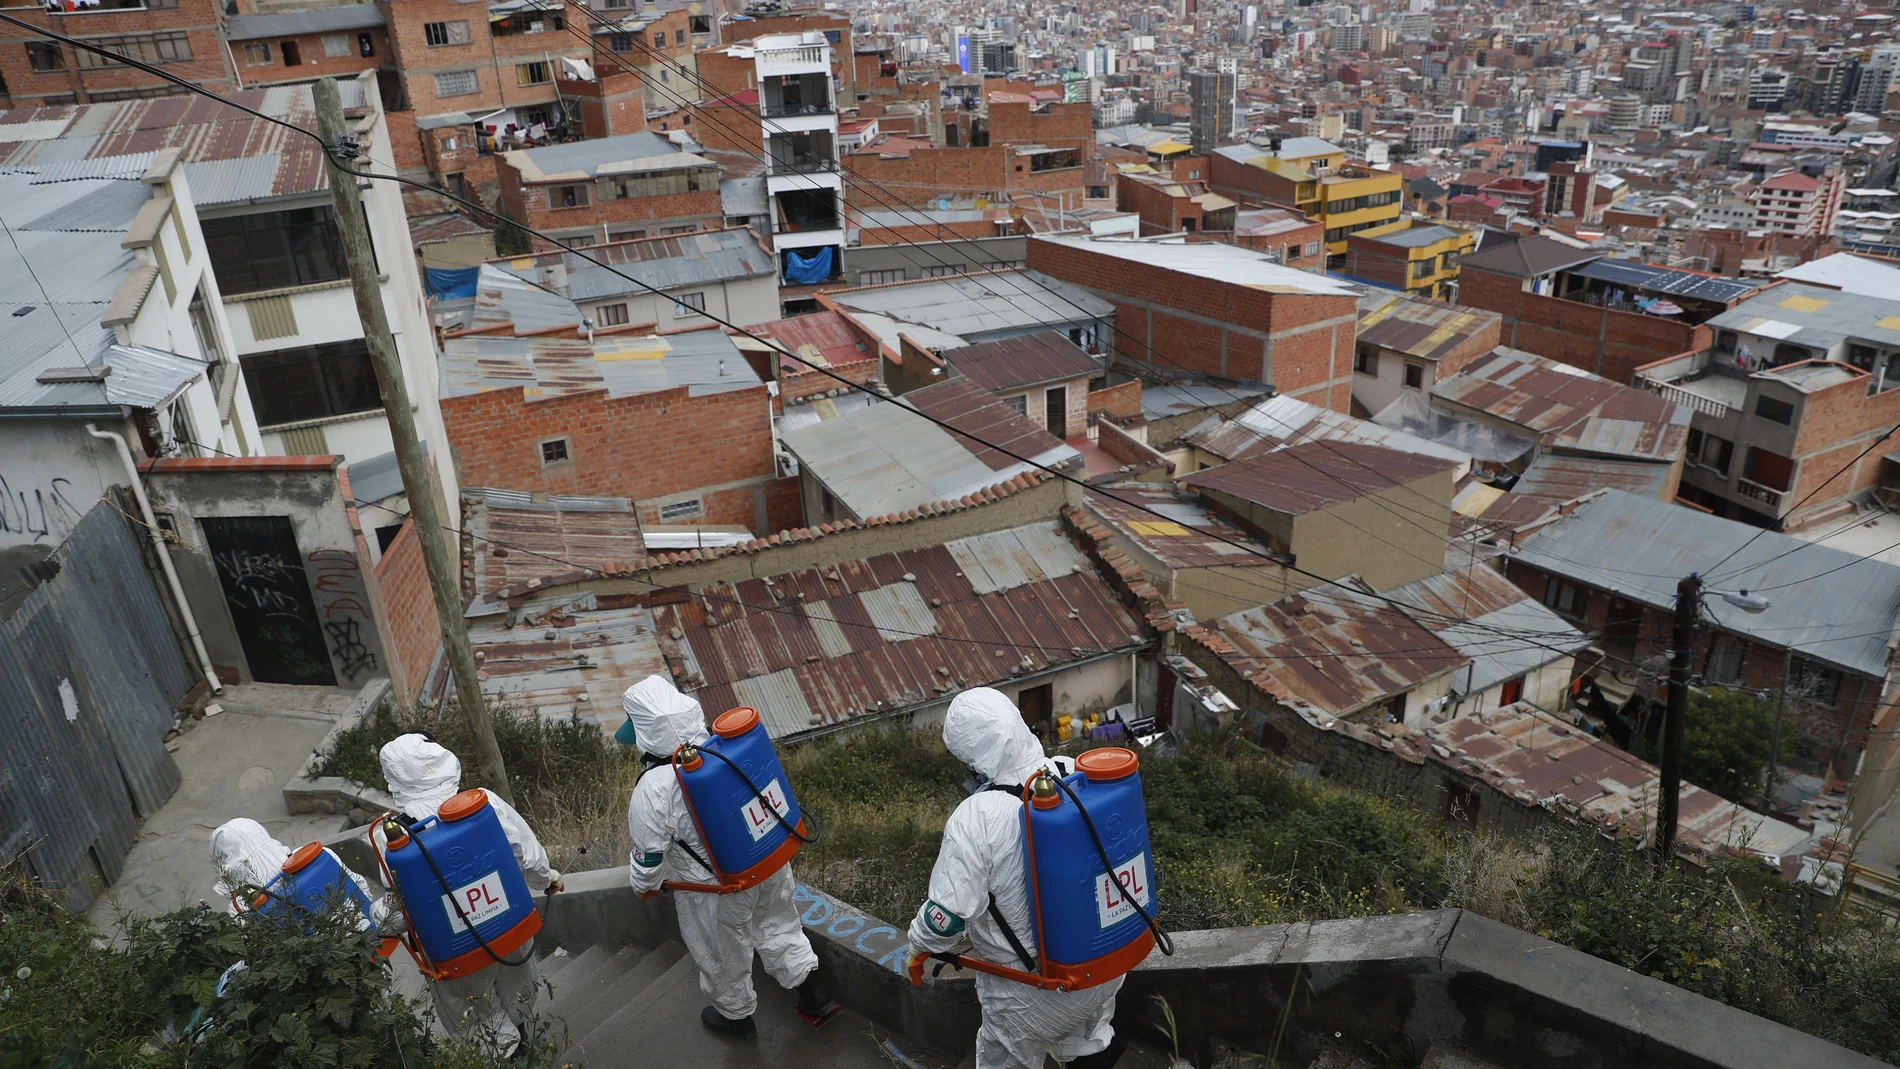 City workers disinfect a stairway in attempt to help contain the spread of the new coronavirus, in La Paz, Bolivia, Tuesday, April 28, 2020. (AP Photo/Juan Karita)